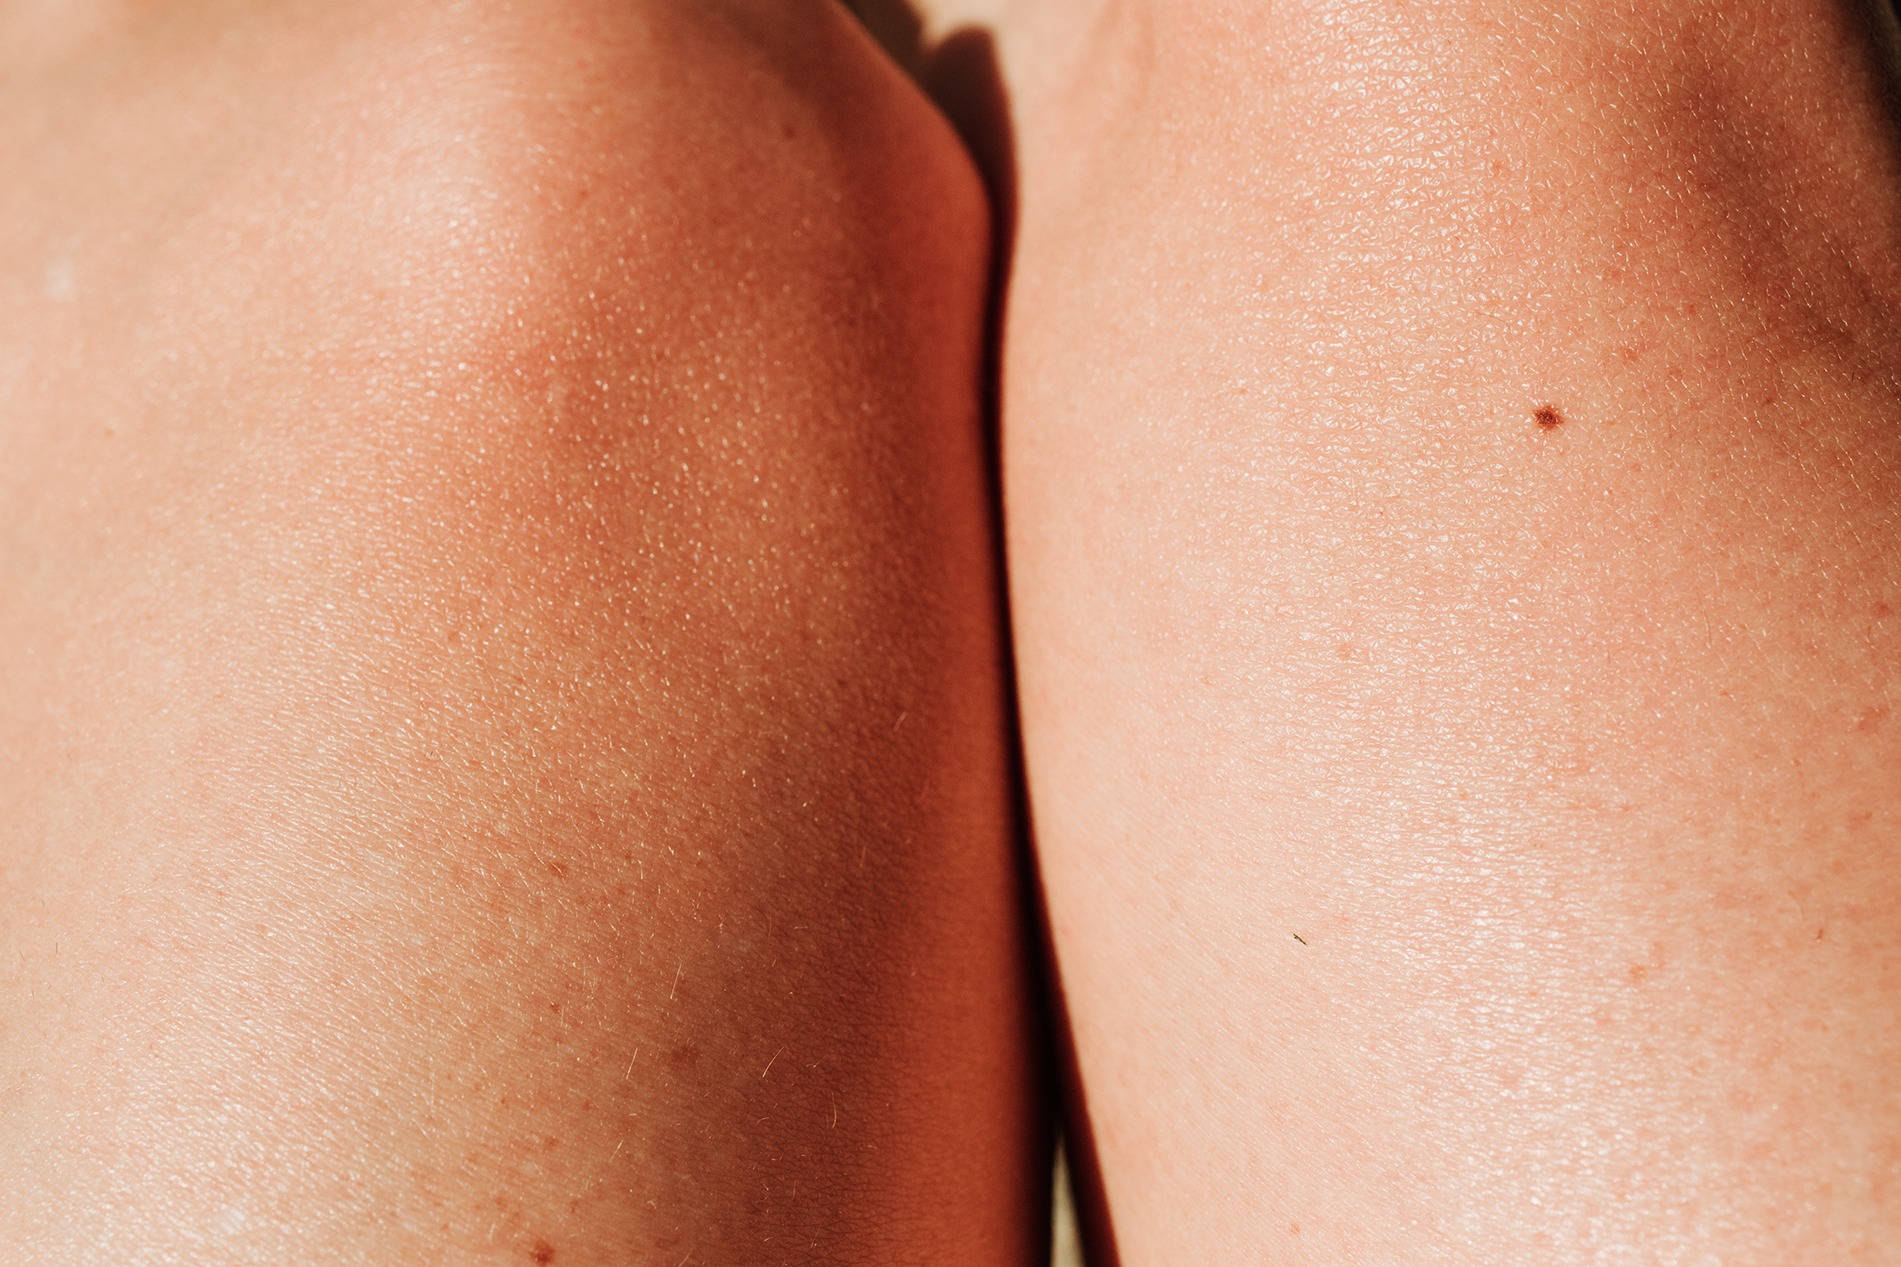 Thigh Chafing: What It Looks Like, Causes, Treatment, Prevention